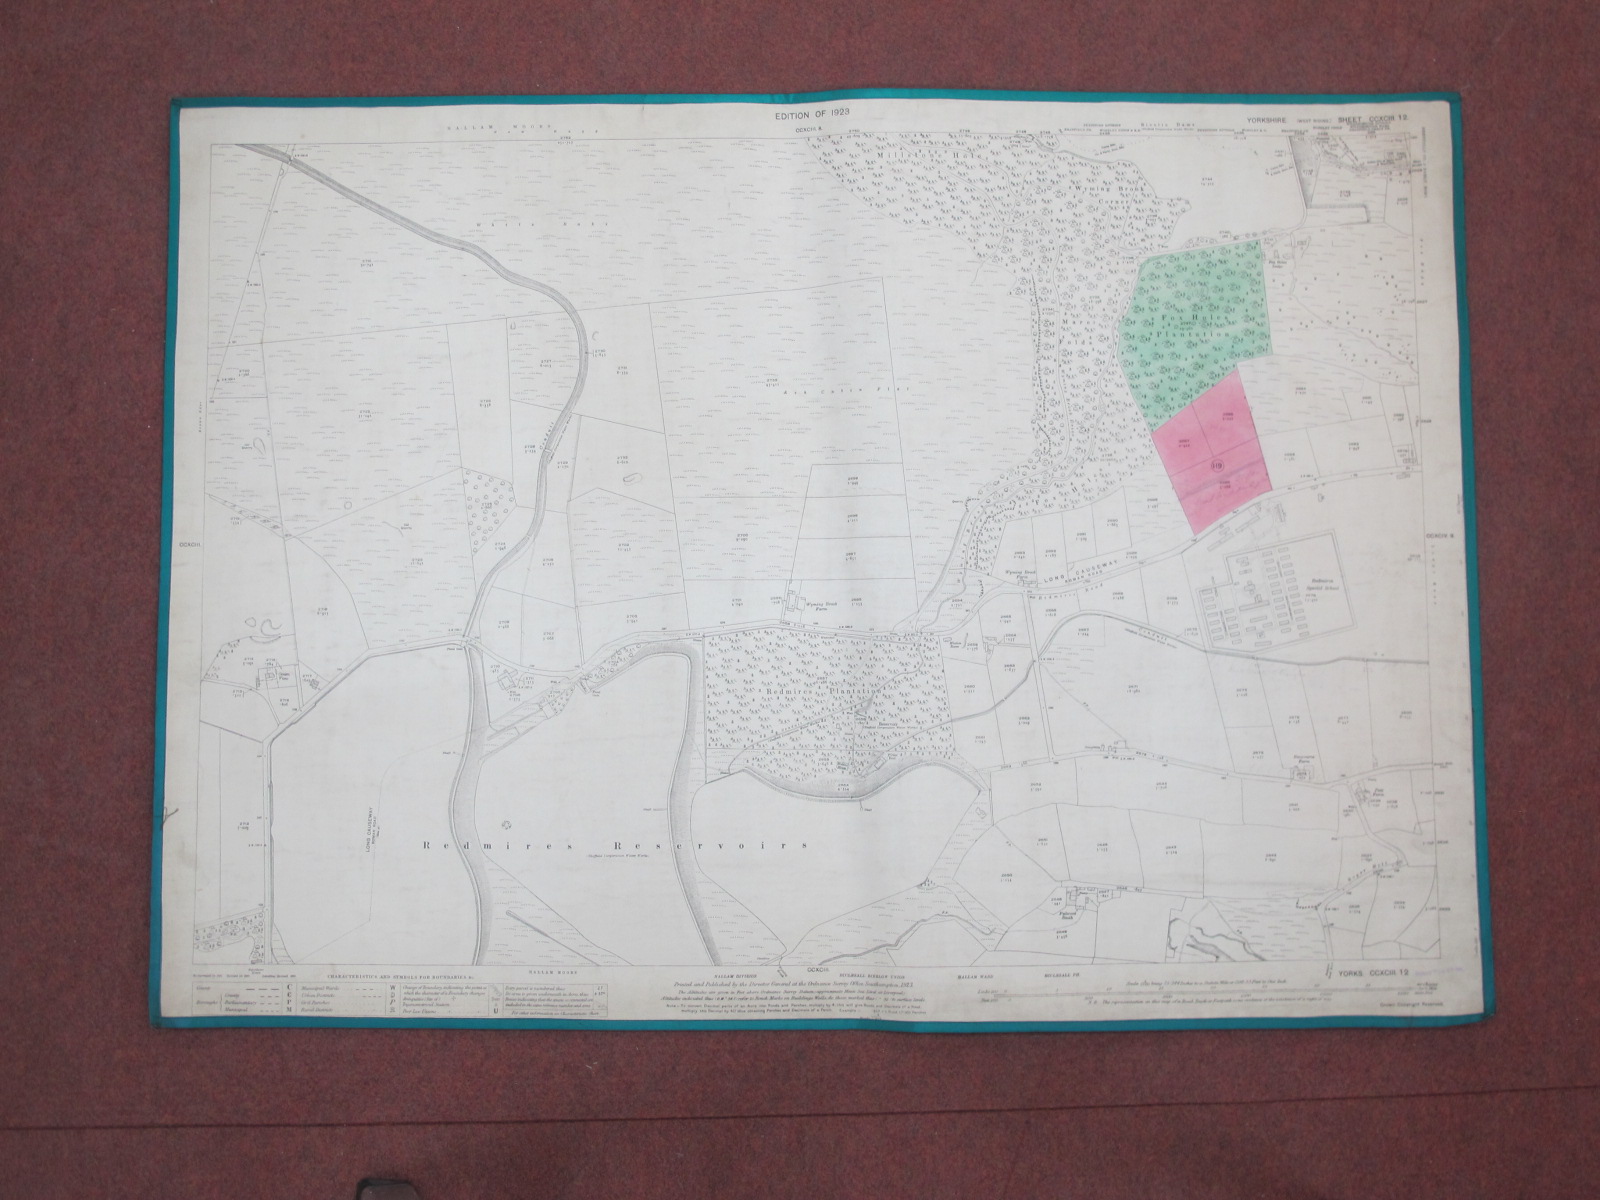 Derbyshire and Yorkshire Maps, some West Riding of Sheffield, to include City Centre, Neepsend, - Image 5 of 10